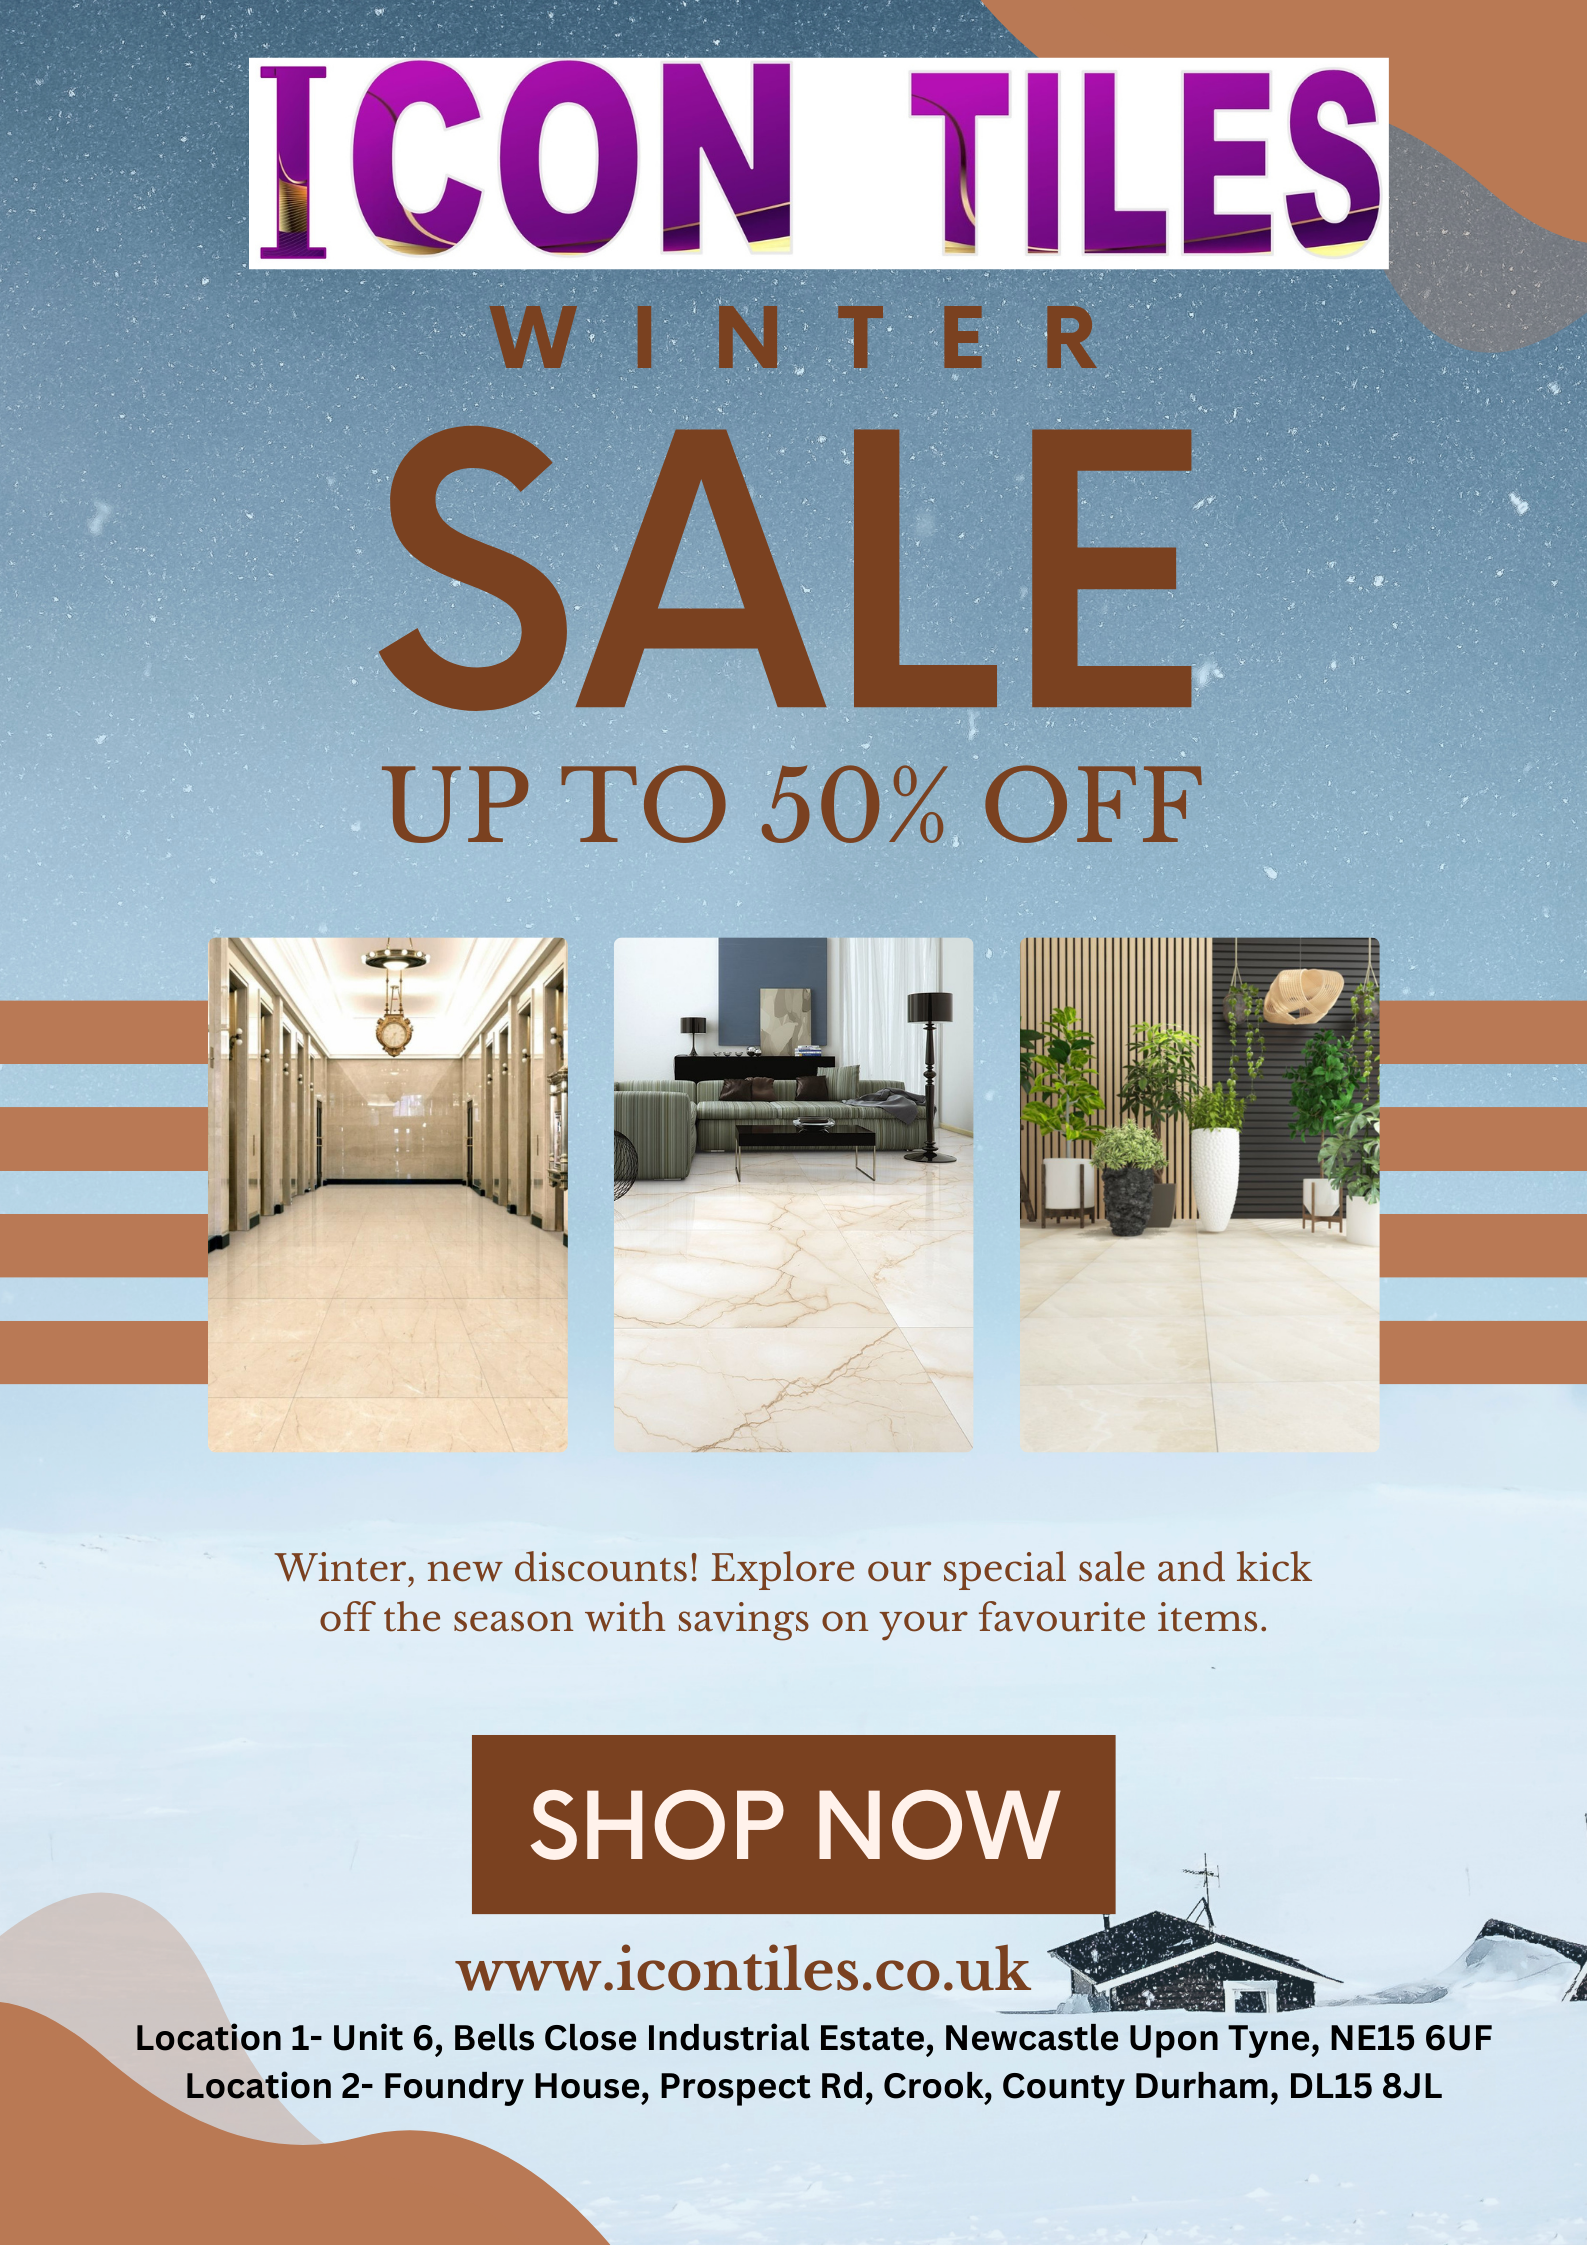 Winter Sale Upto 50% off on all Wall Tiles by Icon TilesHome and LifestyleHome - Kitchen AppliancesNoidaNoida Sector 10